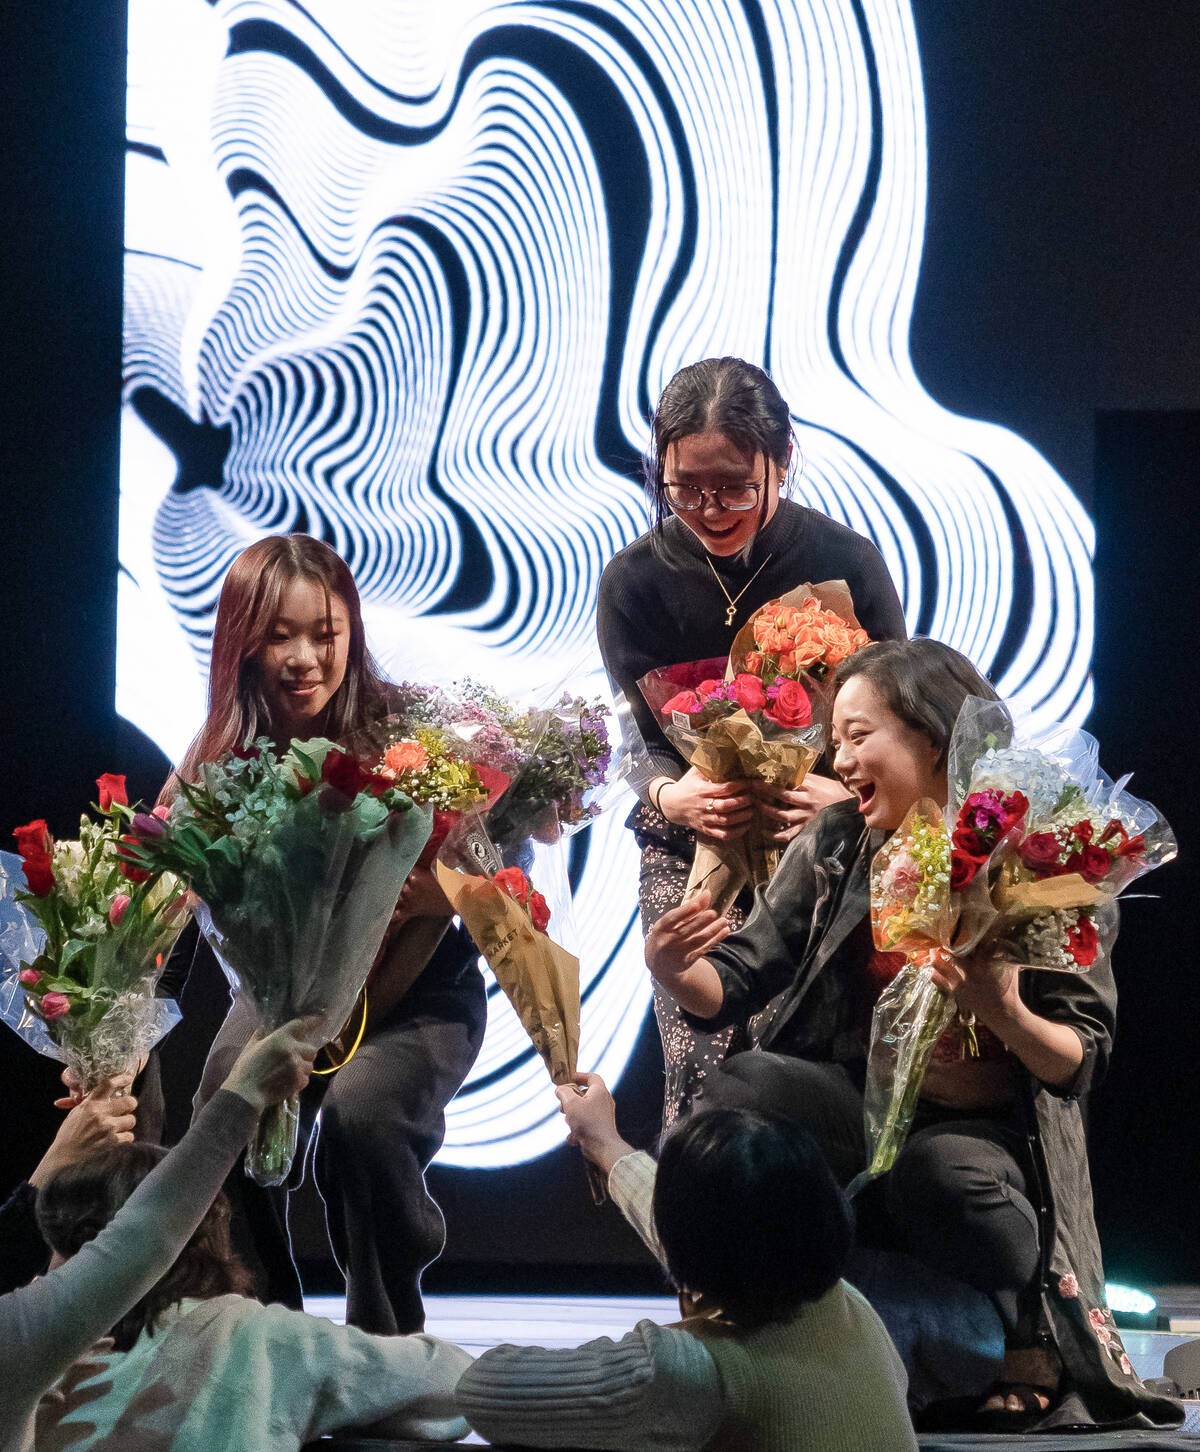 Flowers are gifted to Lunar Gala designers.